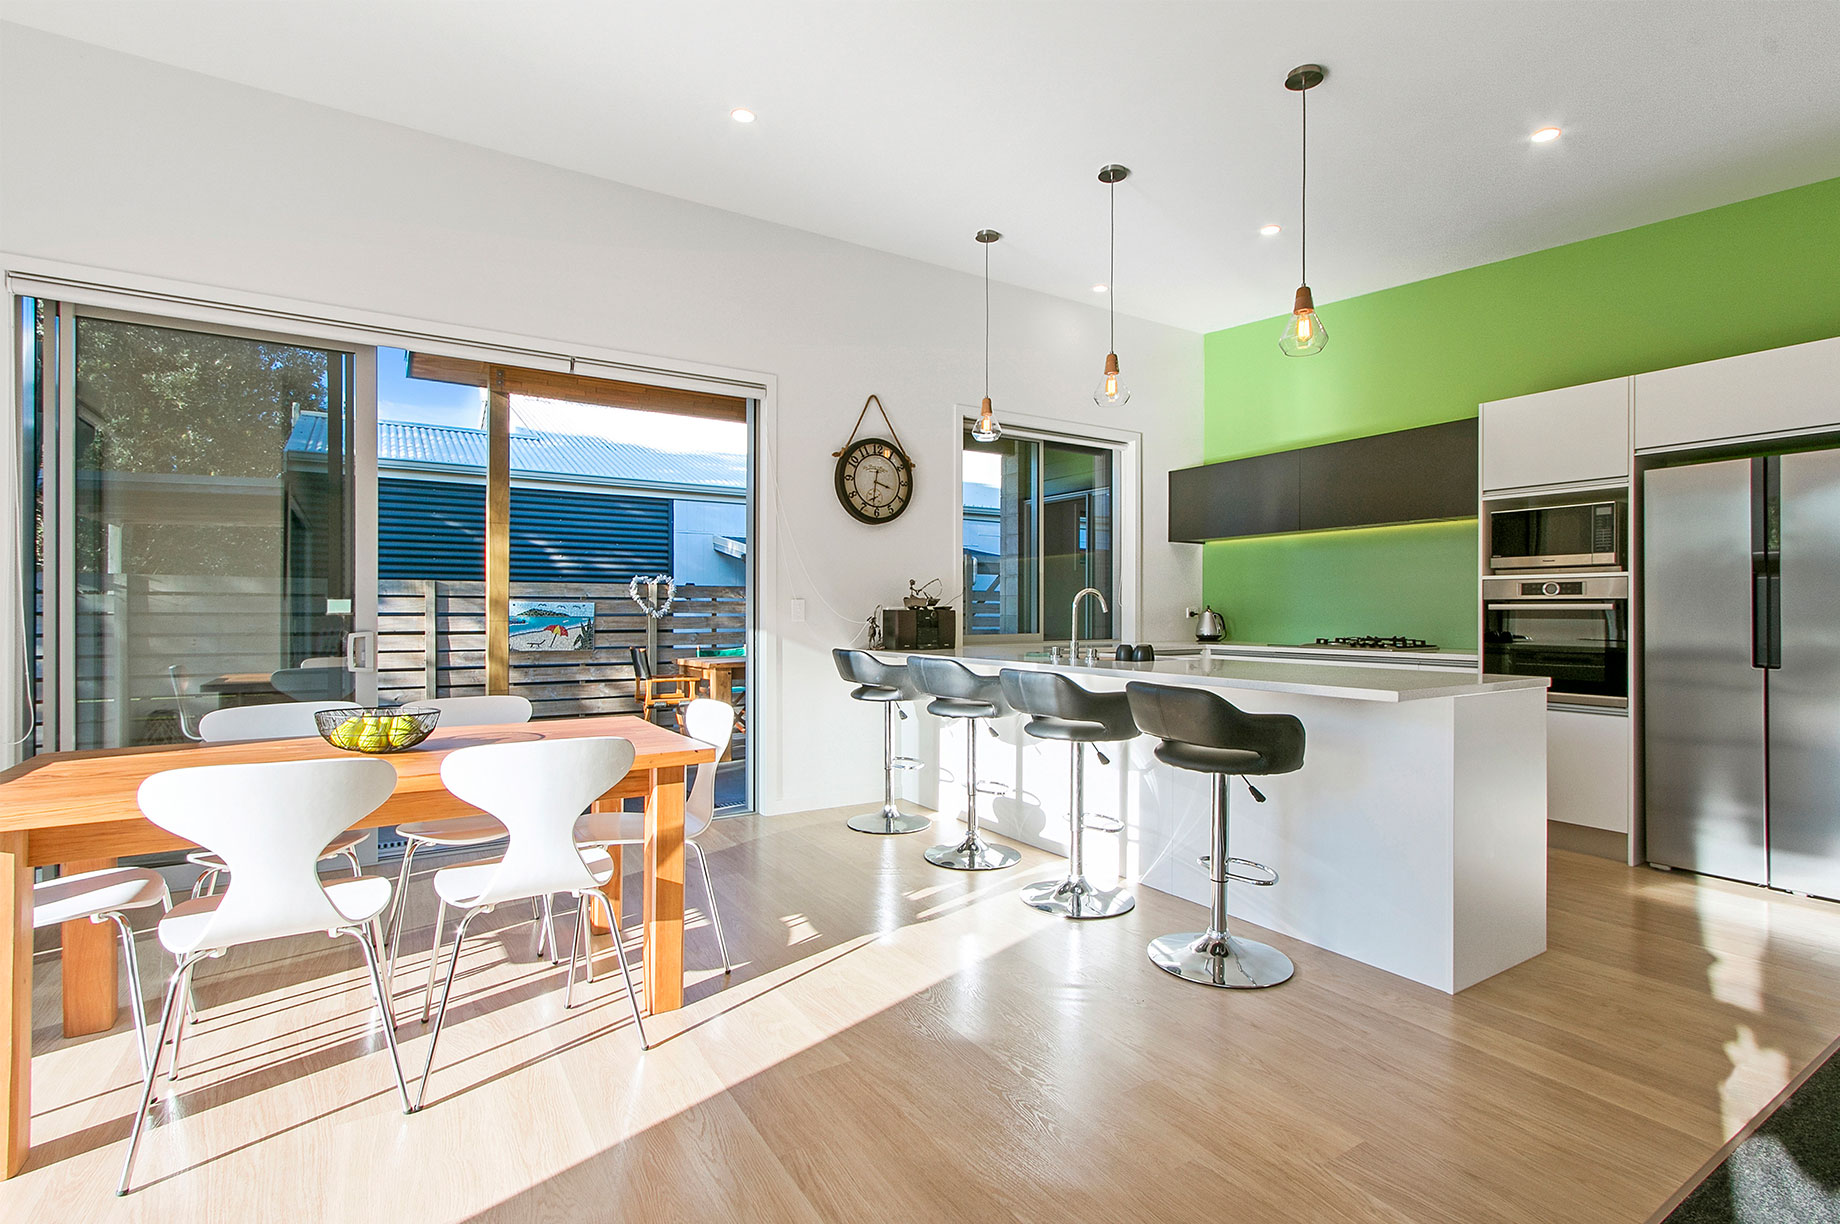 White and black kitchen with a lime green back wall interior